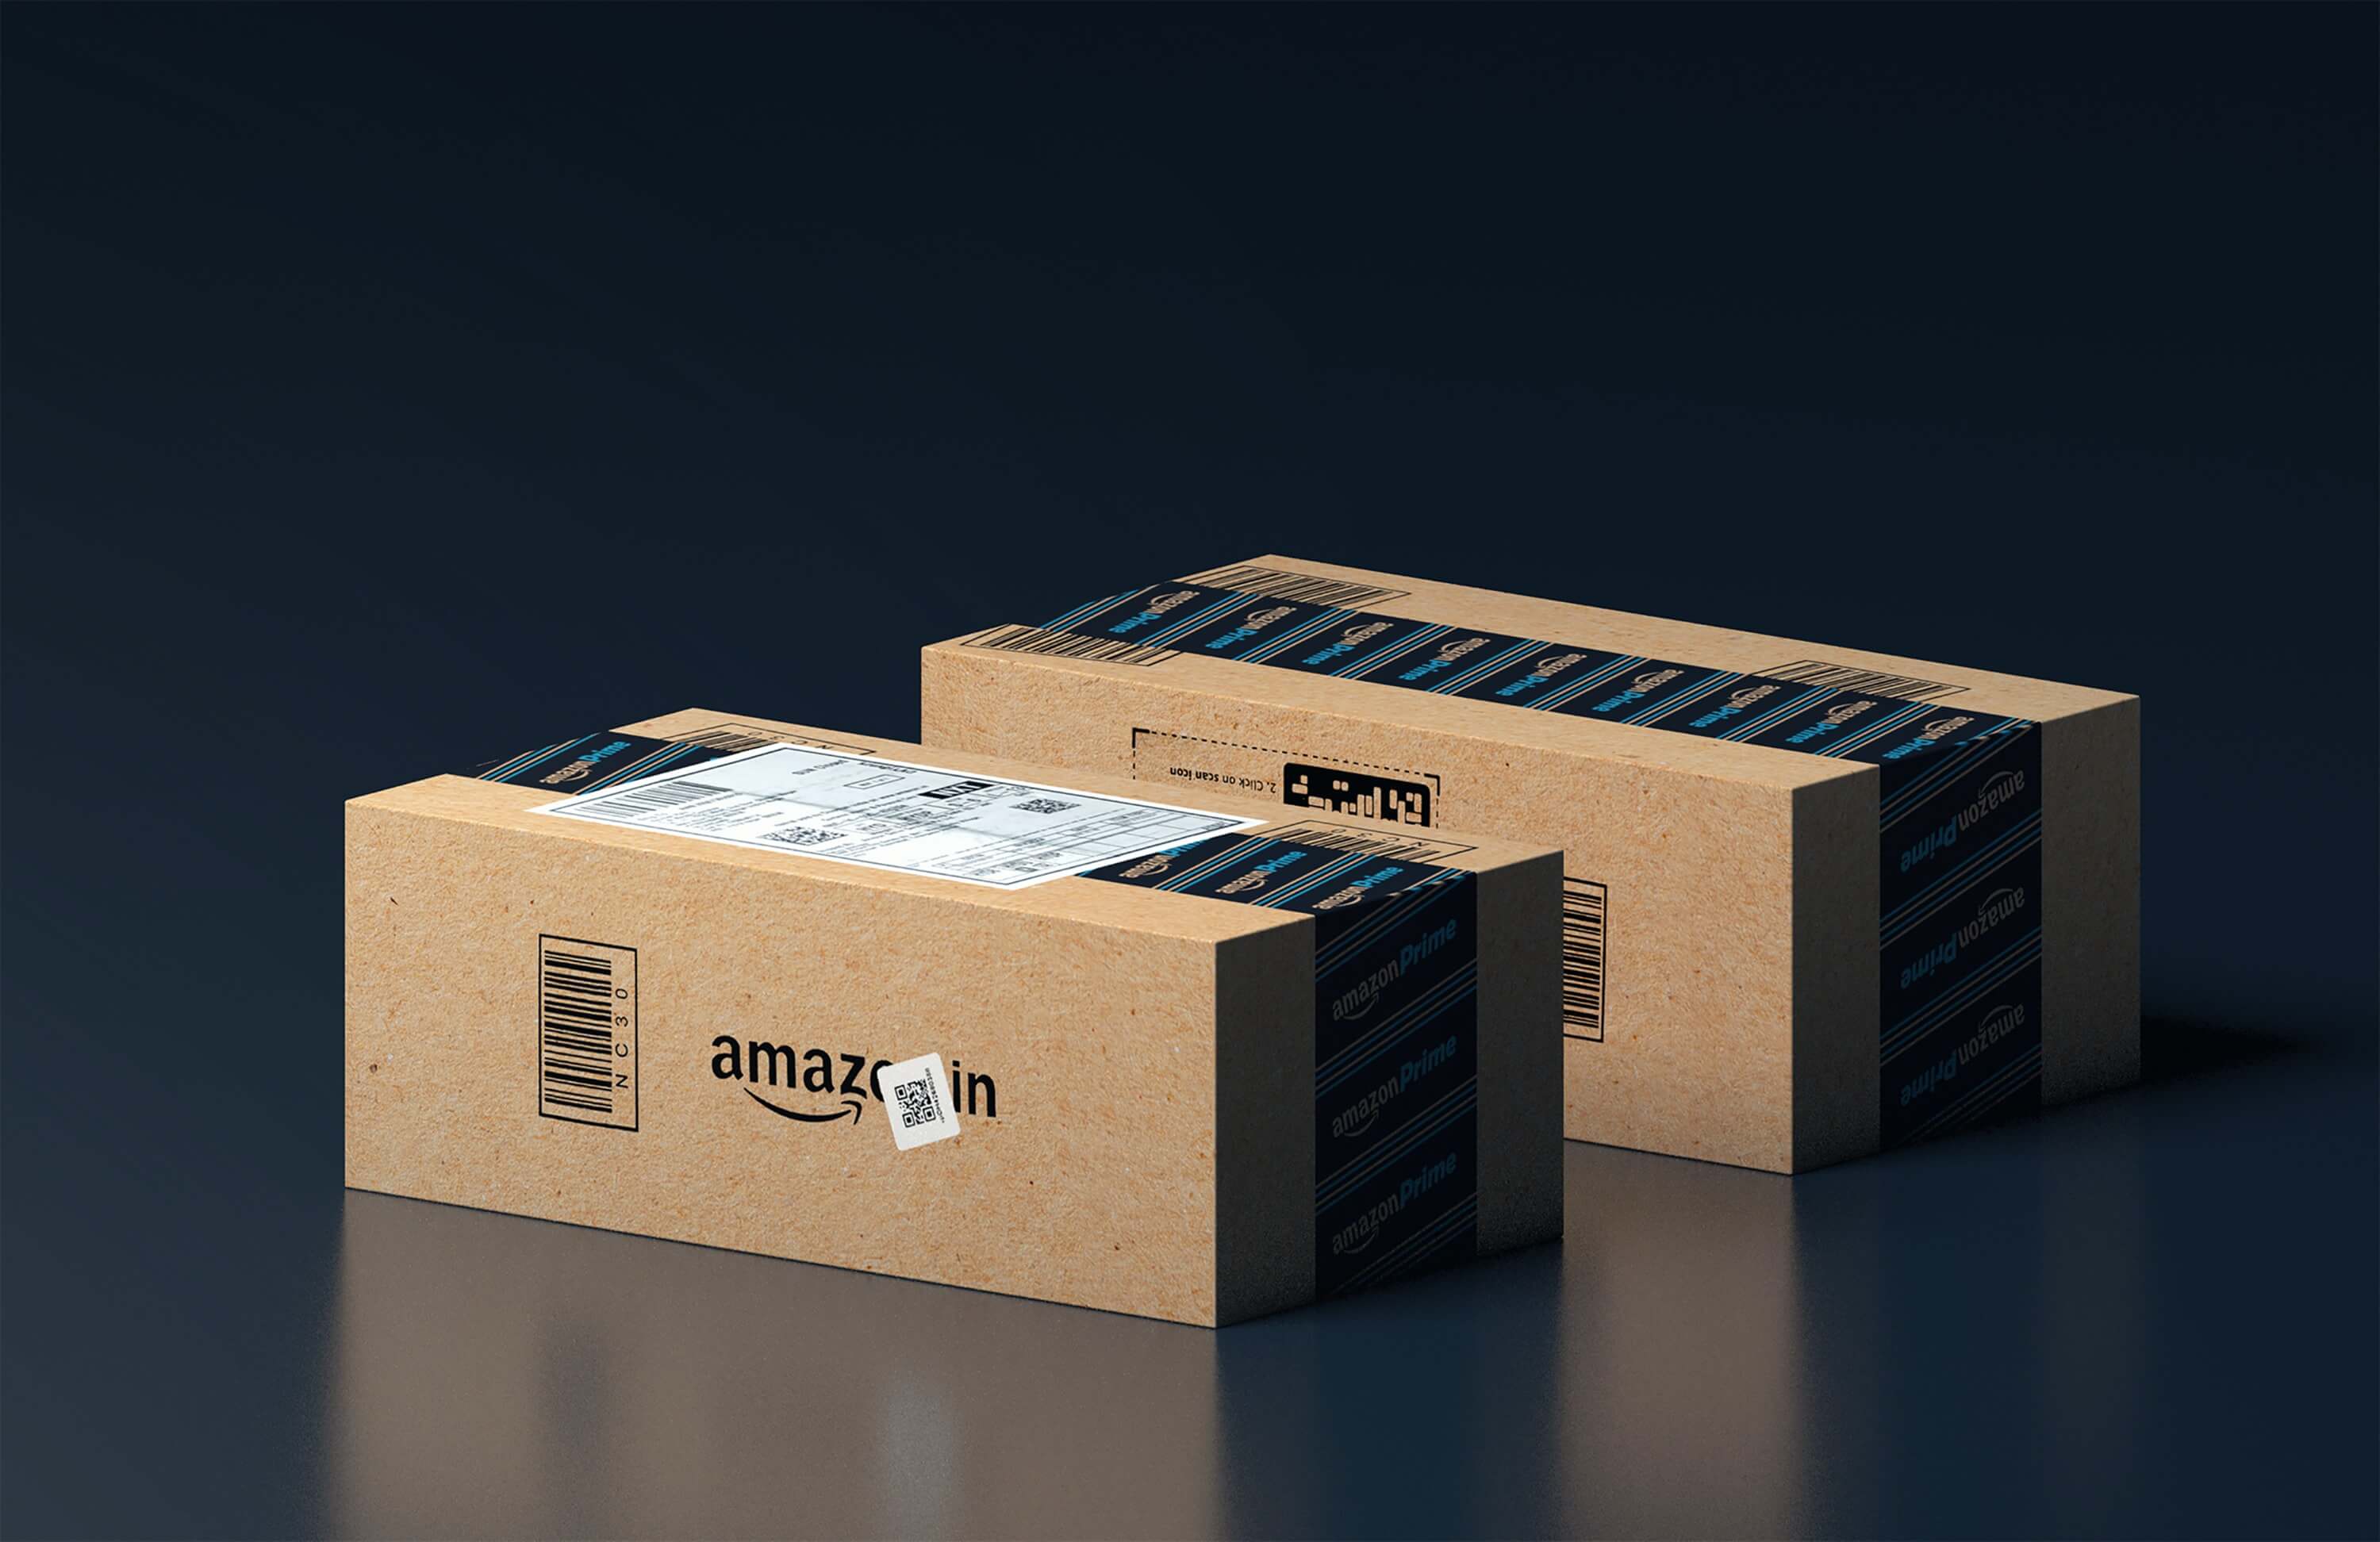 Two Amazon boxes against a black background